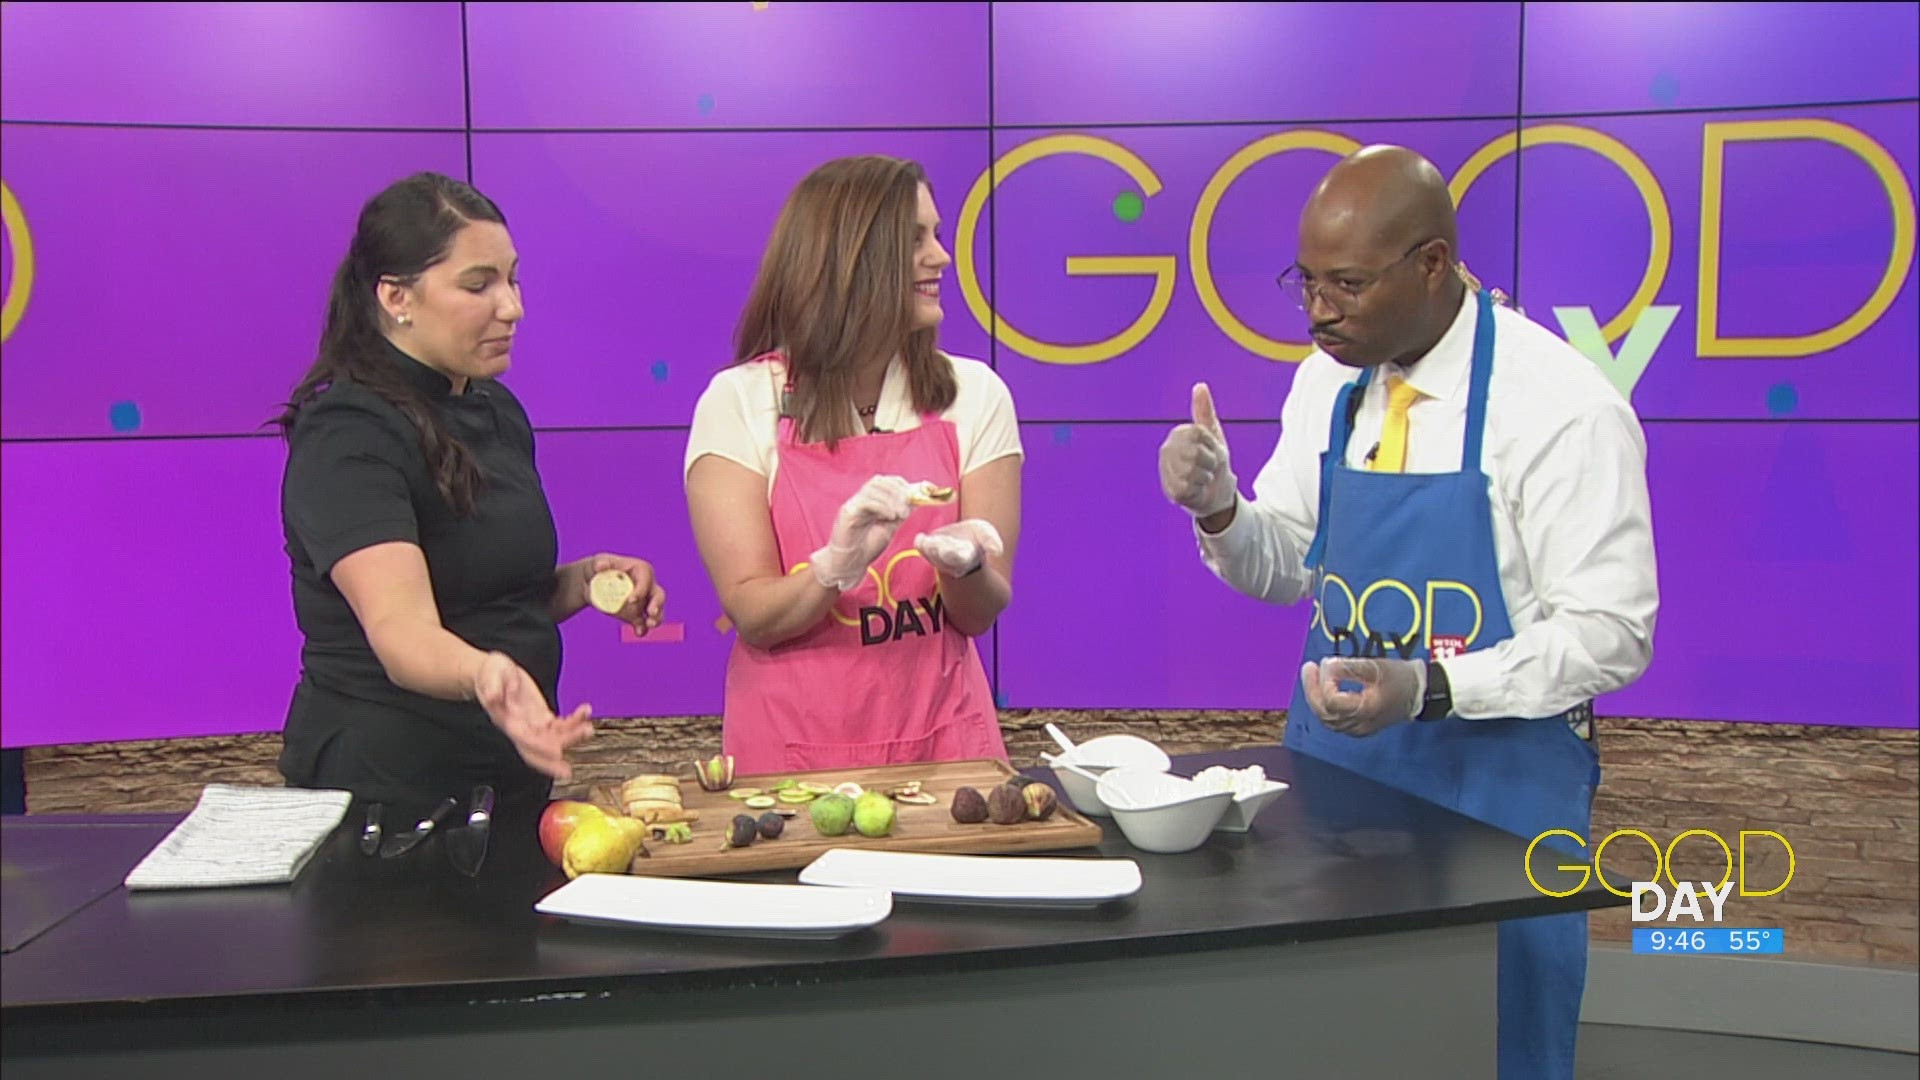 Chef Charine Croak stopped by Good Day with samples for Amanda and Steven.